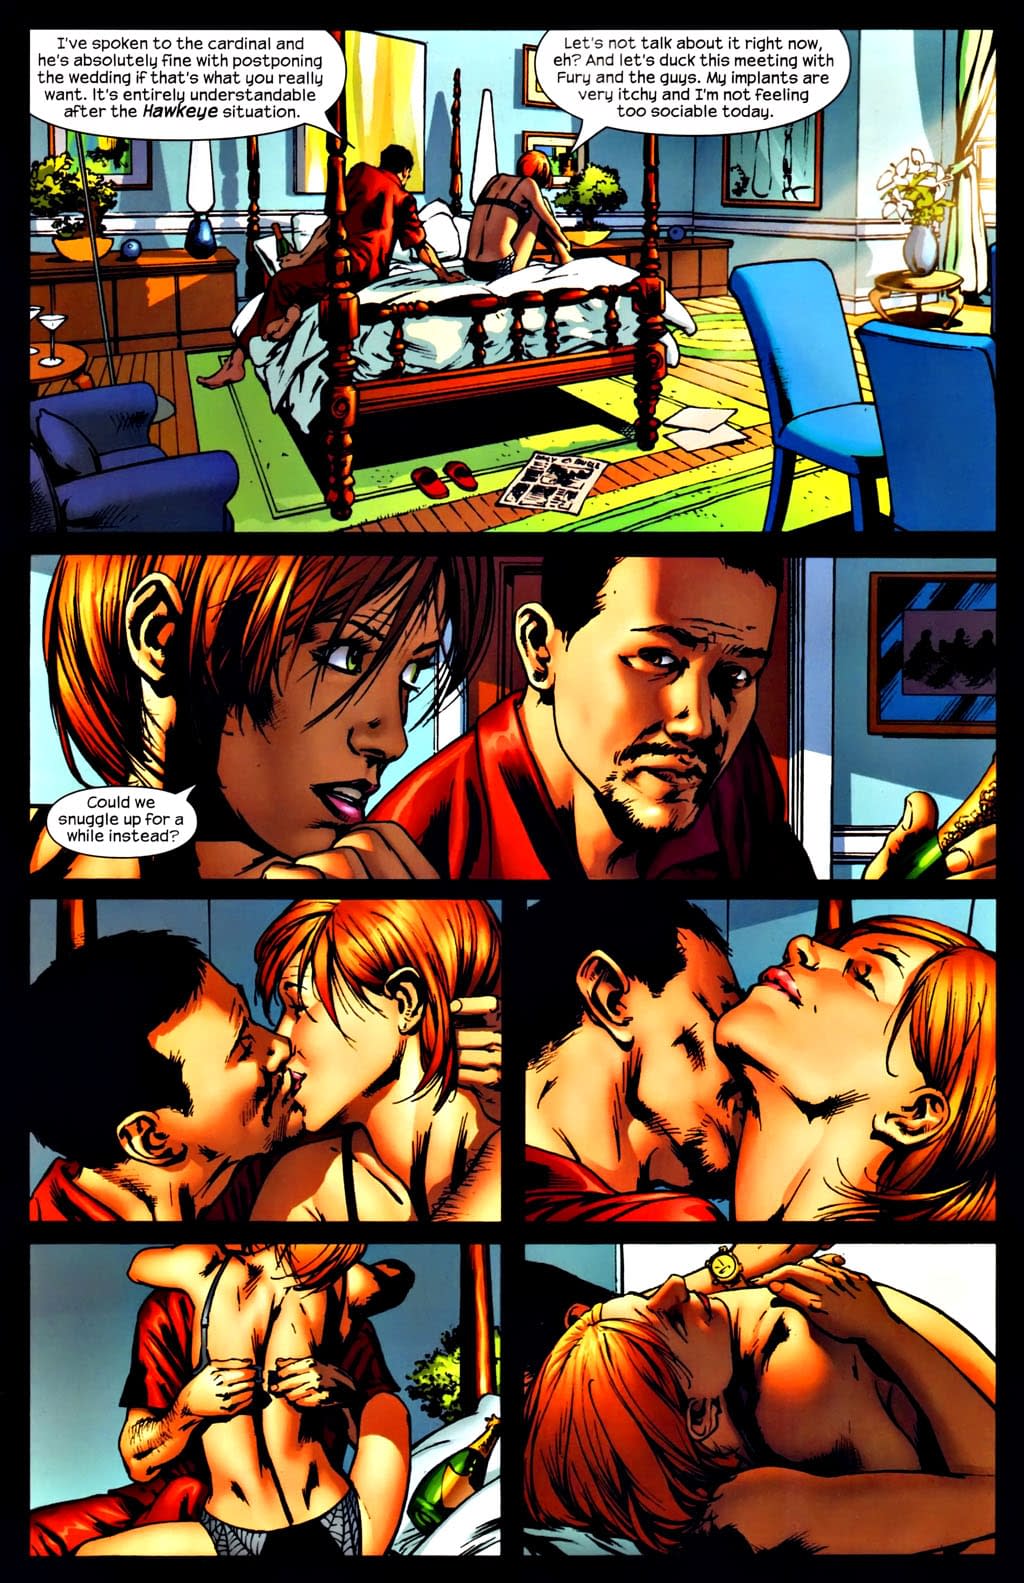 Tony Stark and Black Widow Ultimate Sex Scene by Bryan Hitch, Auctioned pic